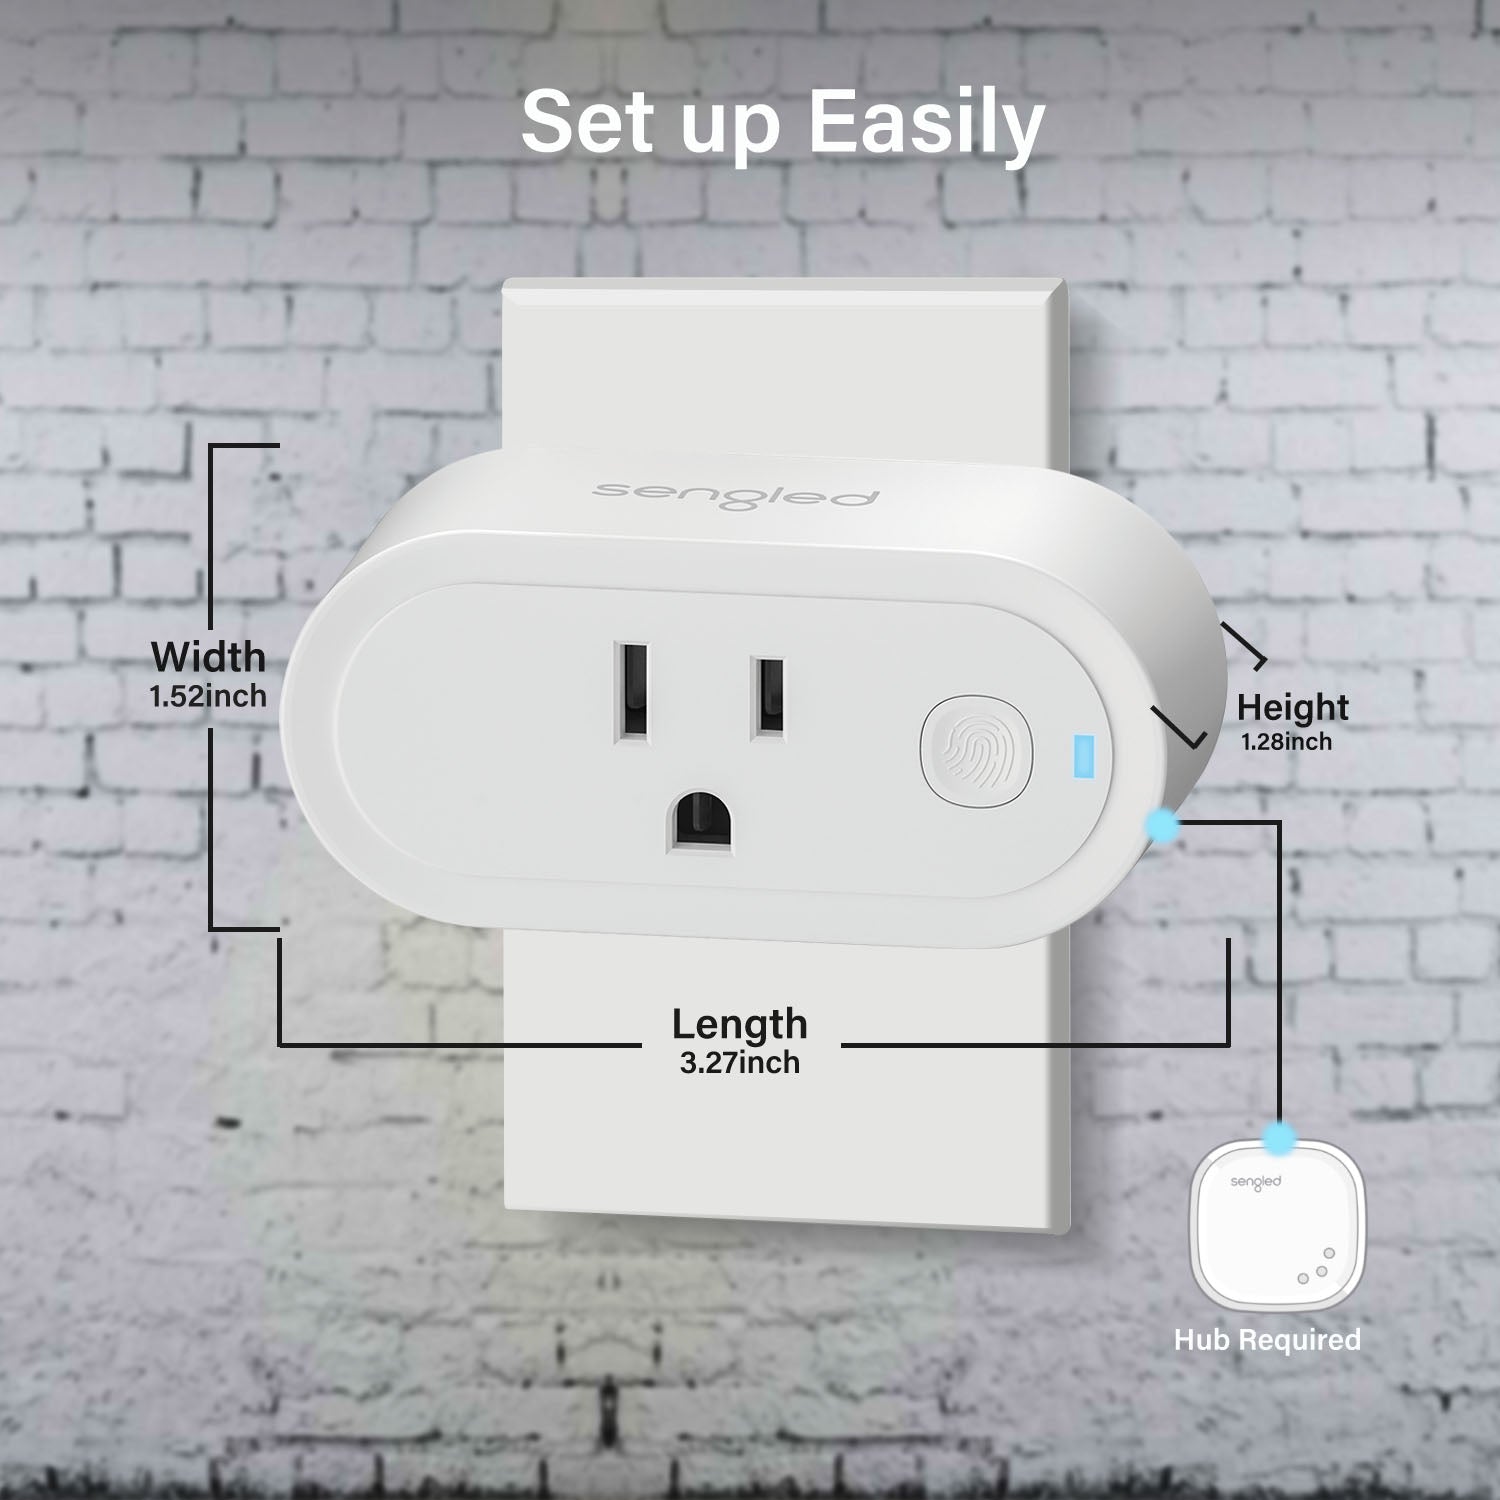 Simple Setup: Connect and configure the Sengled Smart Plug with a simple and straightforward setup process, saving you time and effort in getting it up and running.